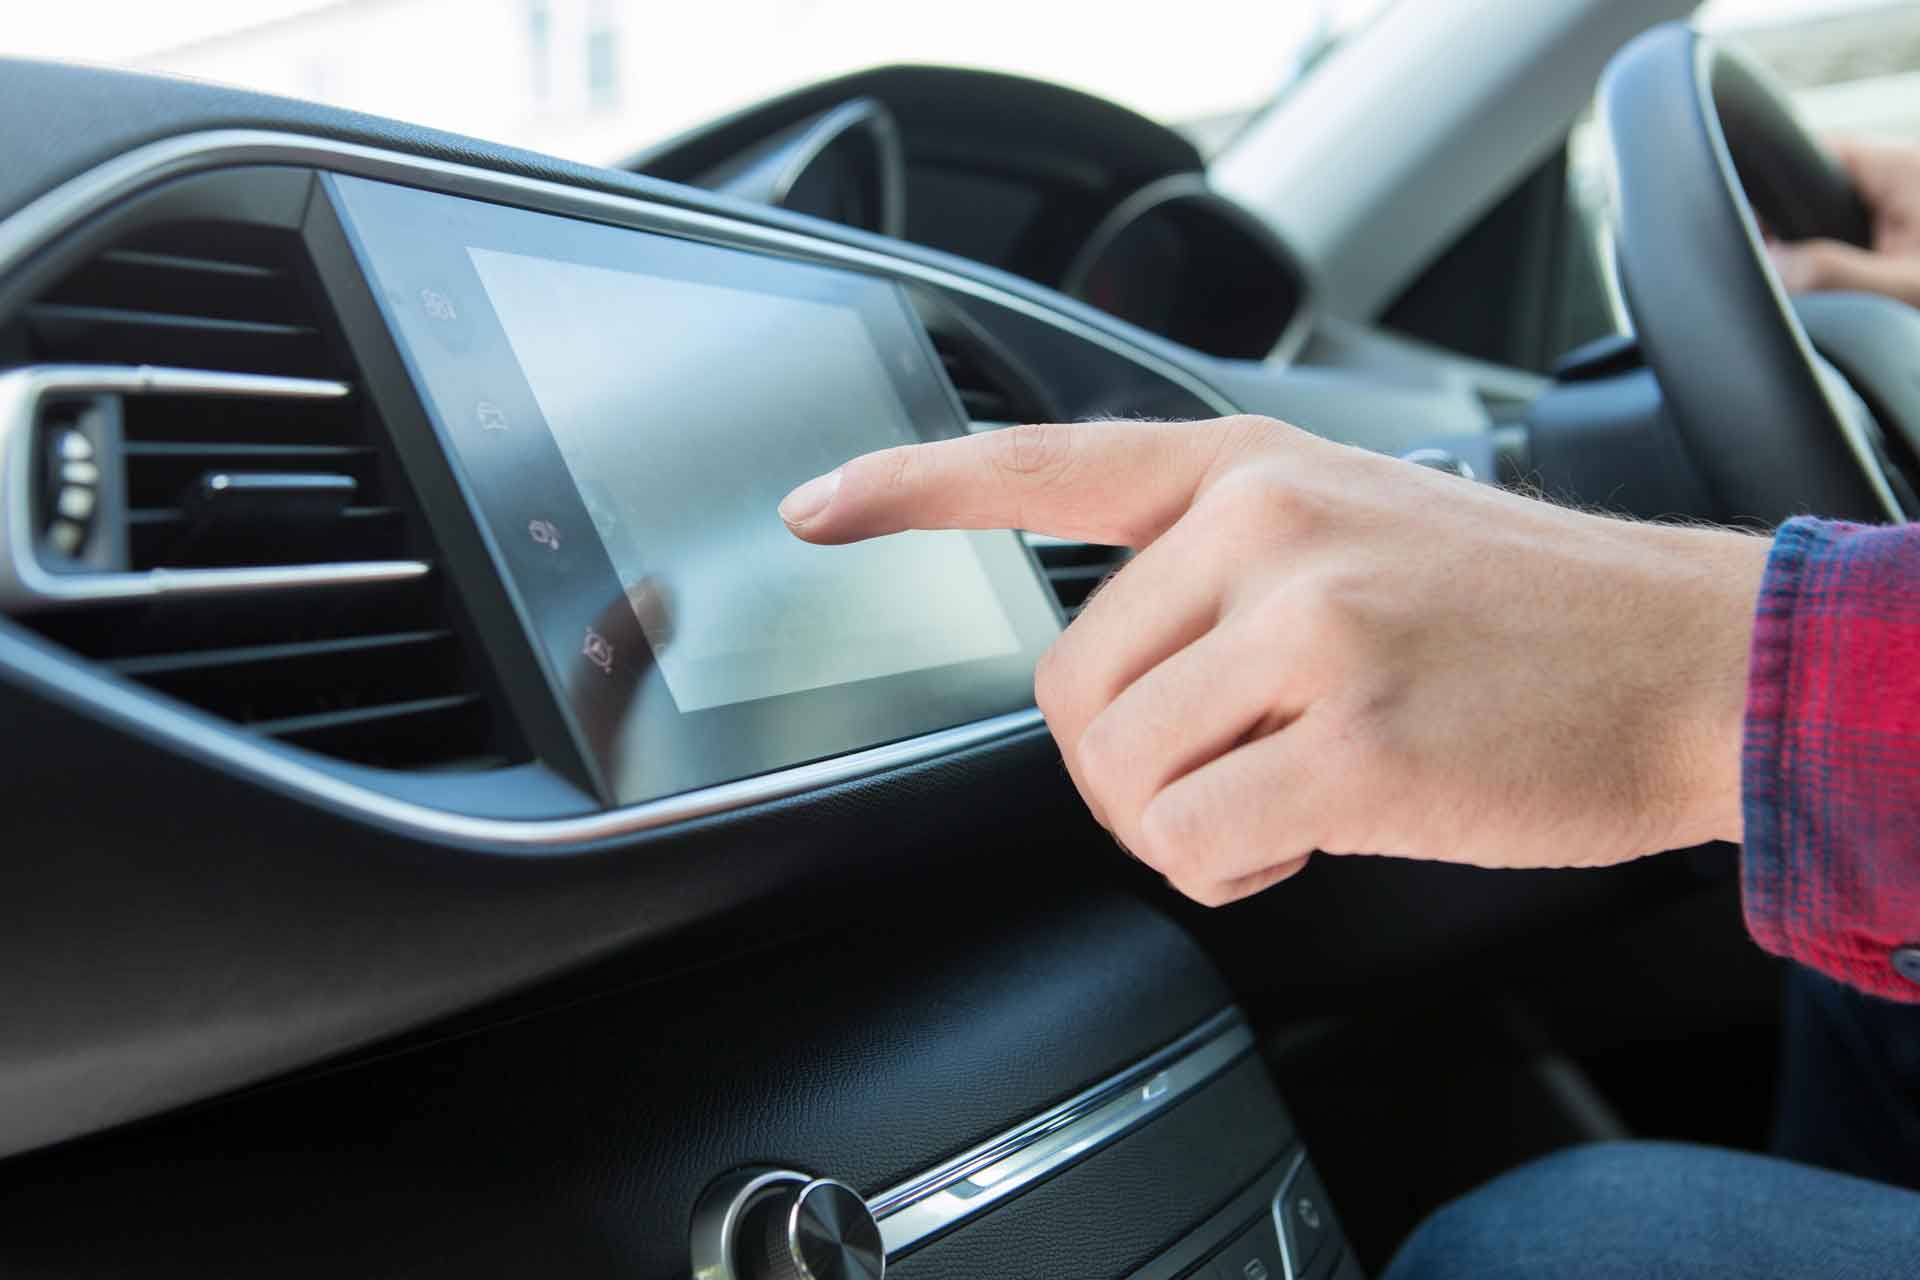 Finger pointing to touchscreen in car dashboard